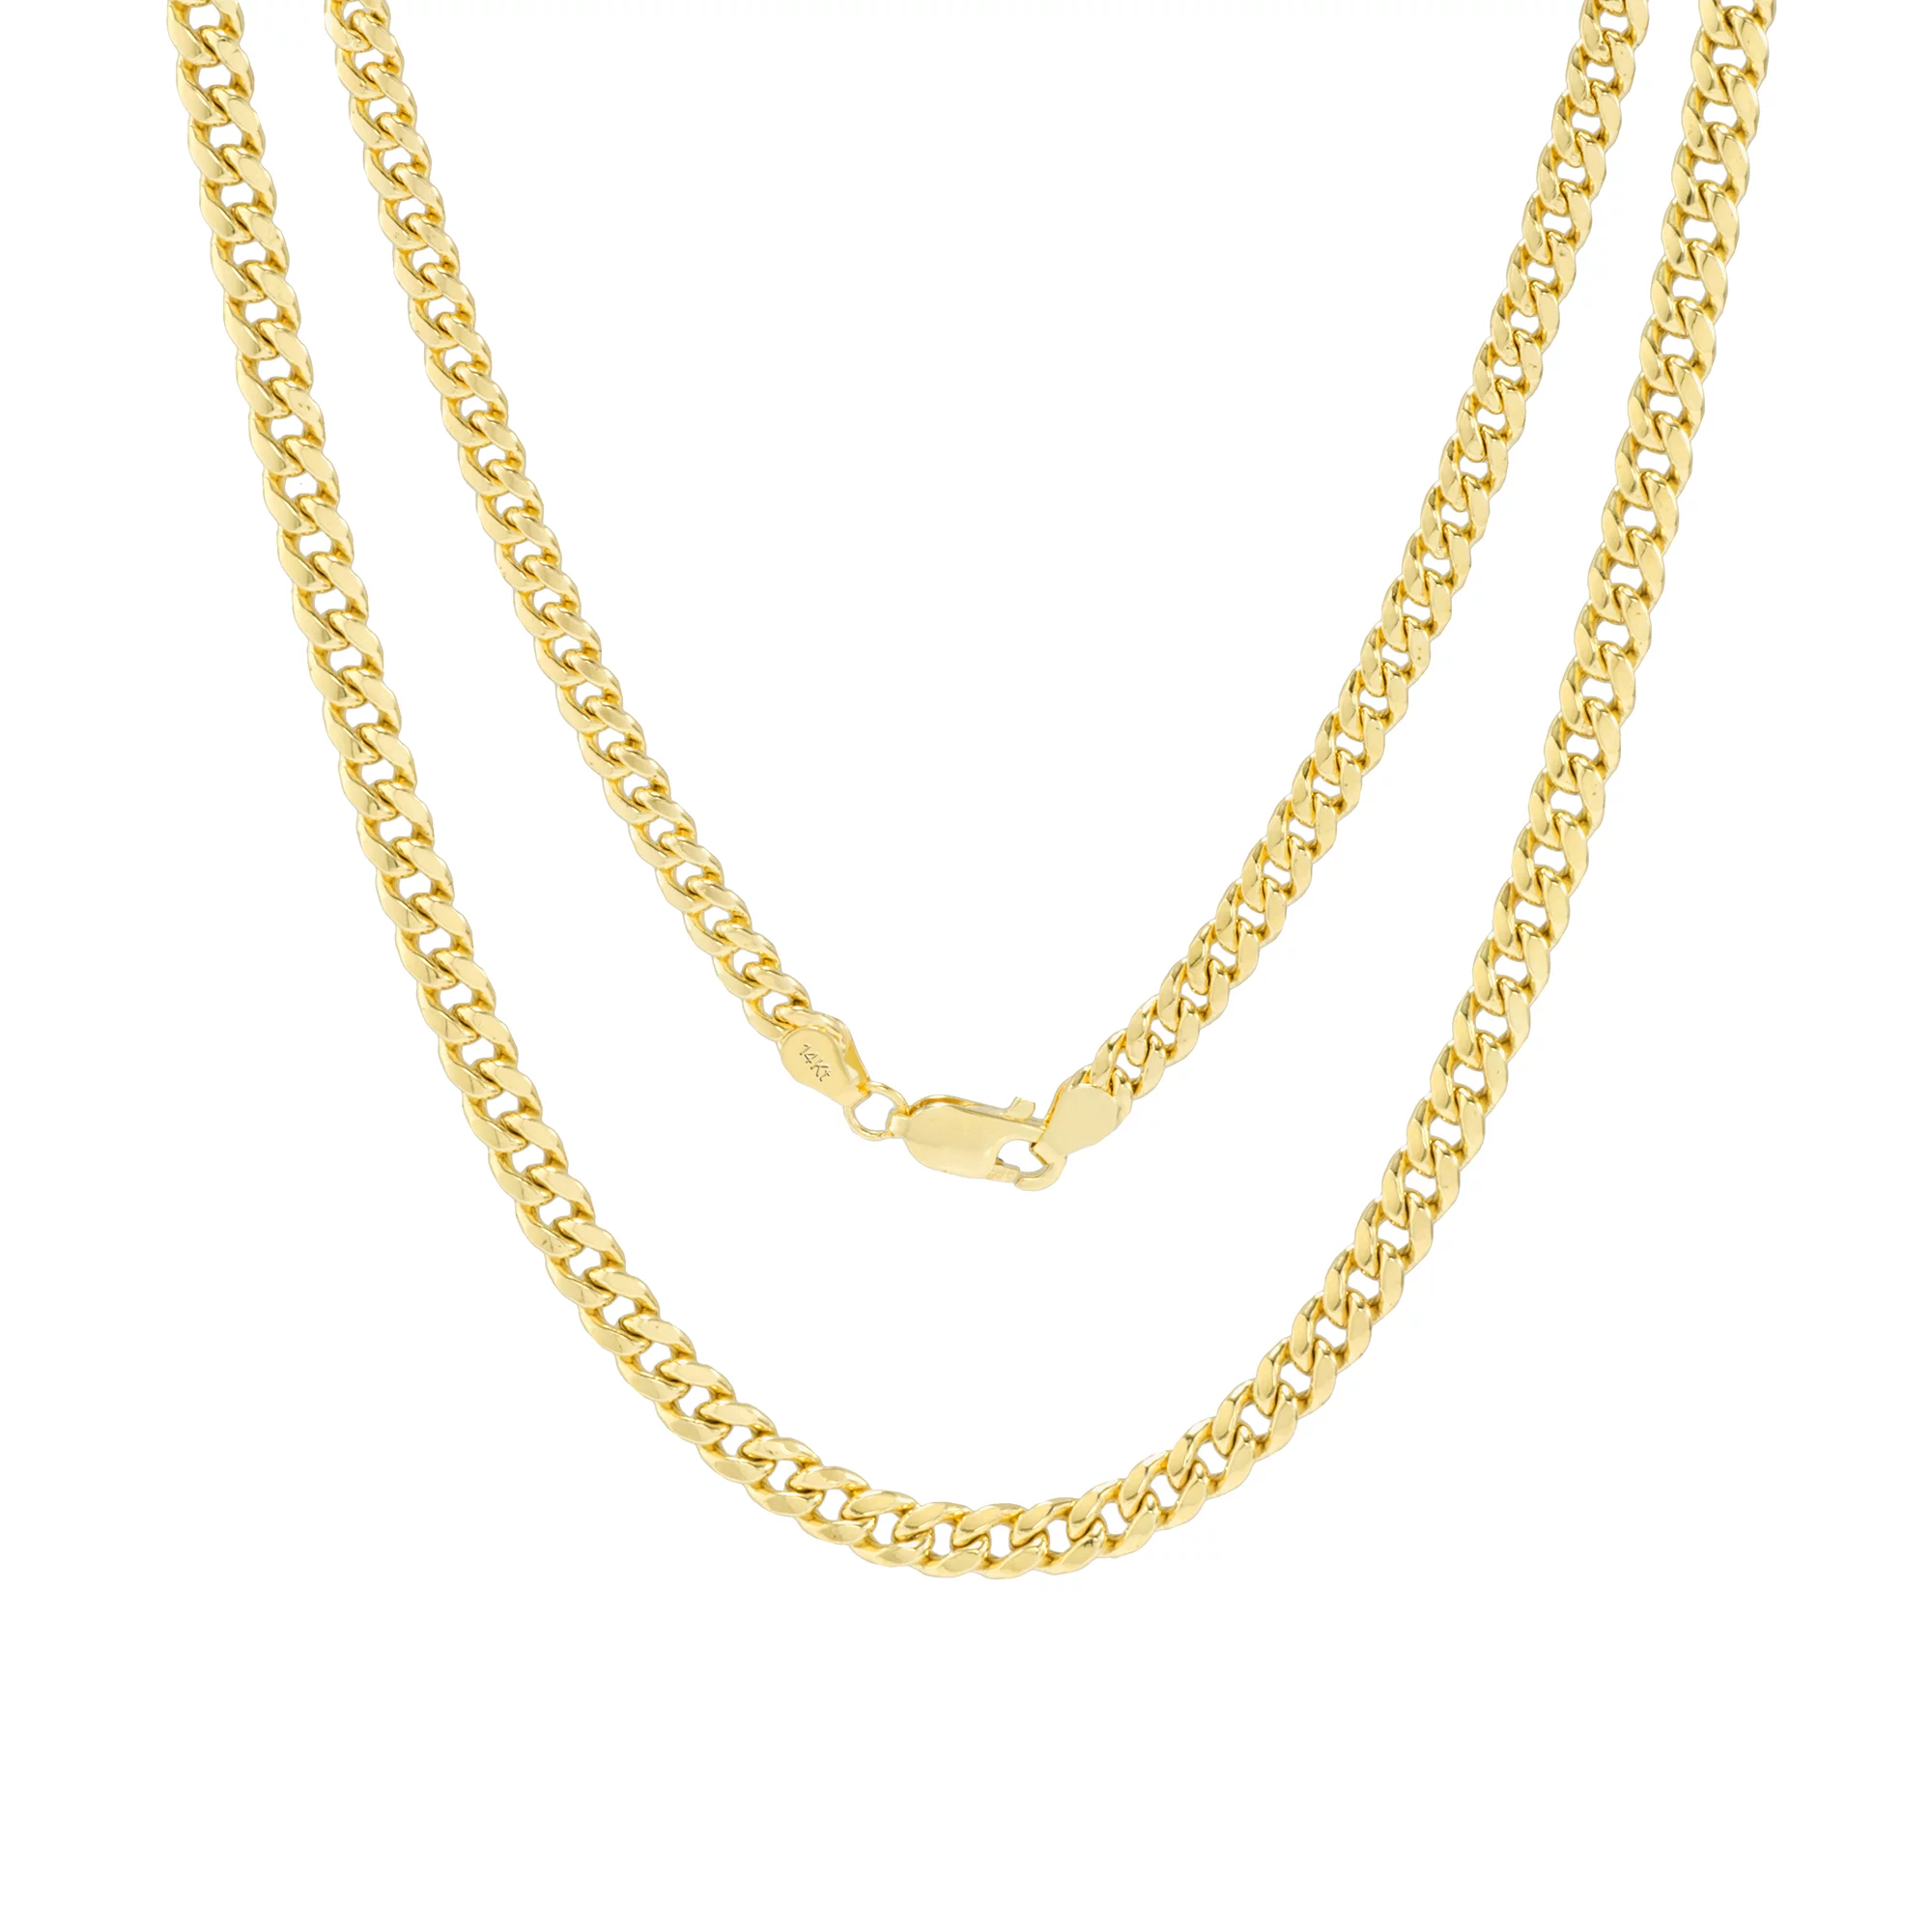 14K Yellow Gold Mens 4.5mm Miami Cuban Link Chain Pendant Necklace, 16"- 30"